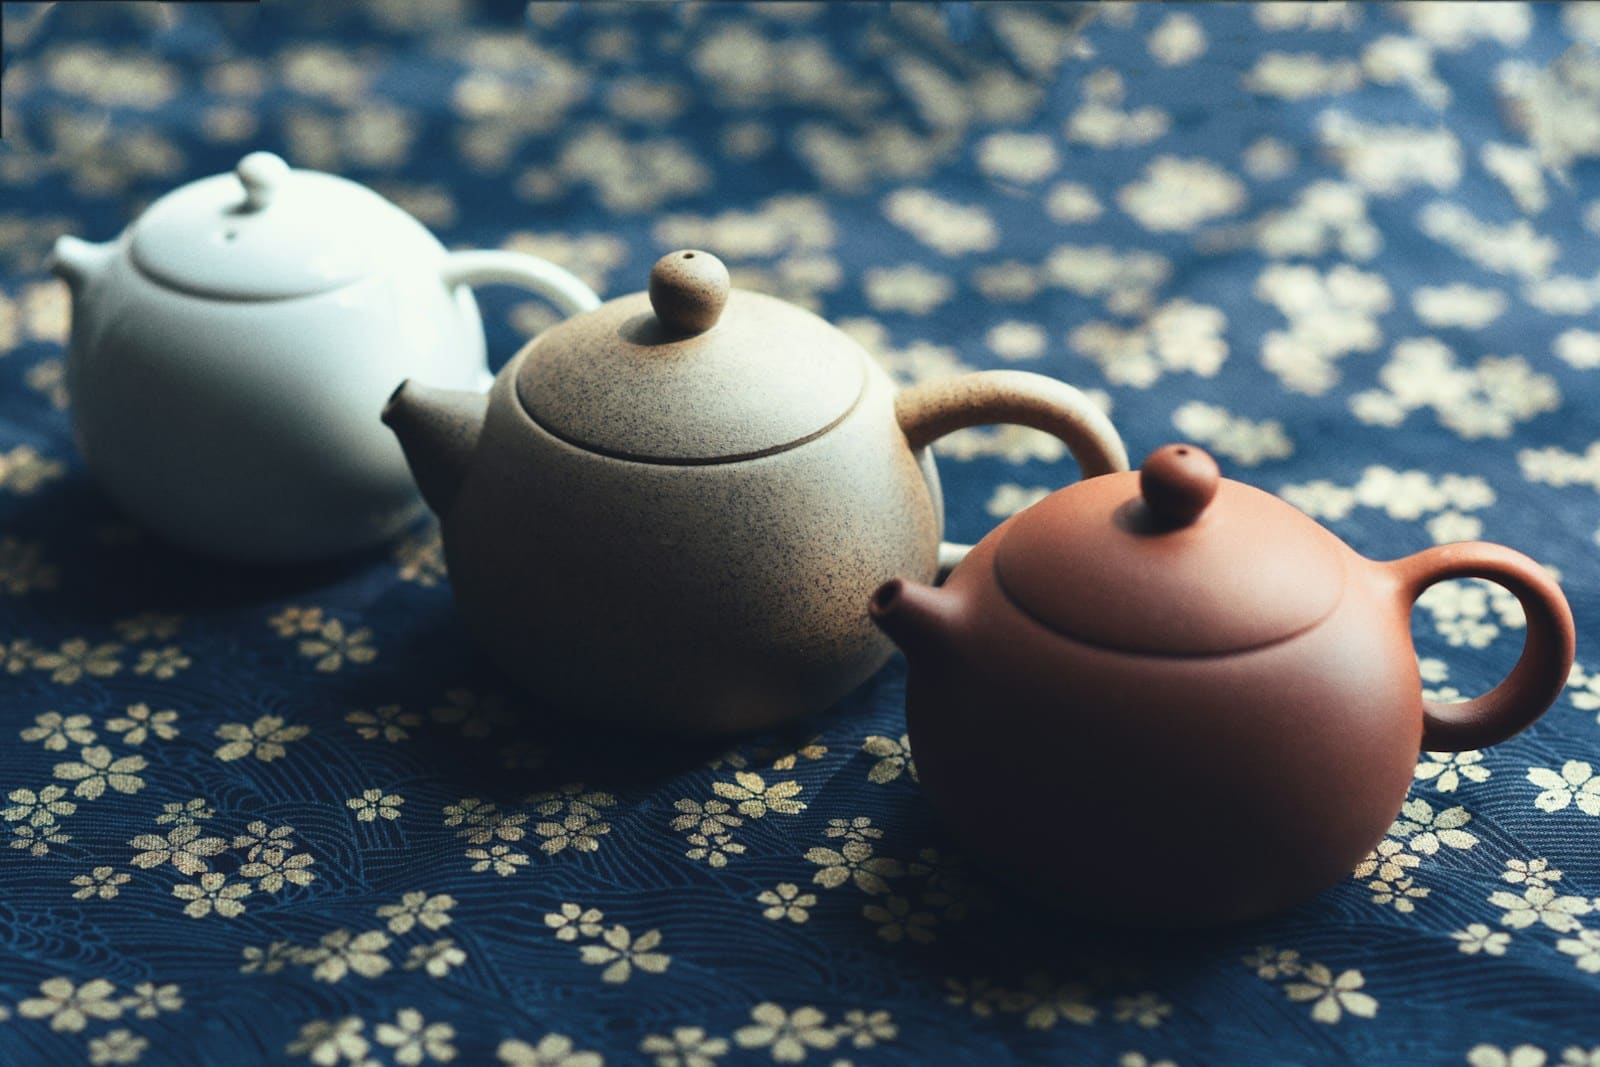 3 Teas to Relieve Your Stress and Anxiety